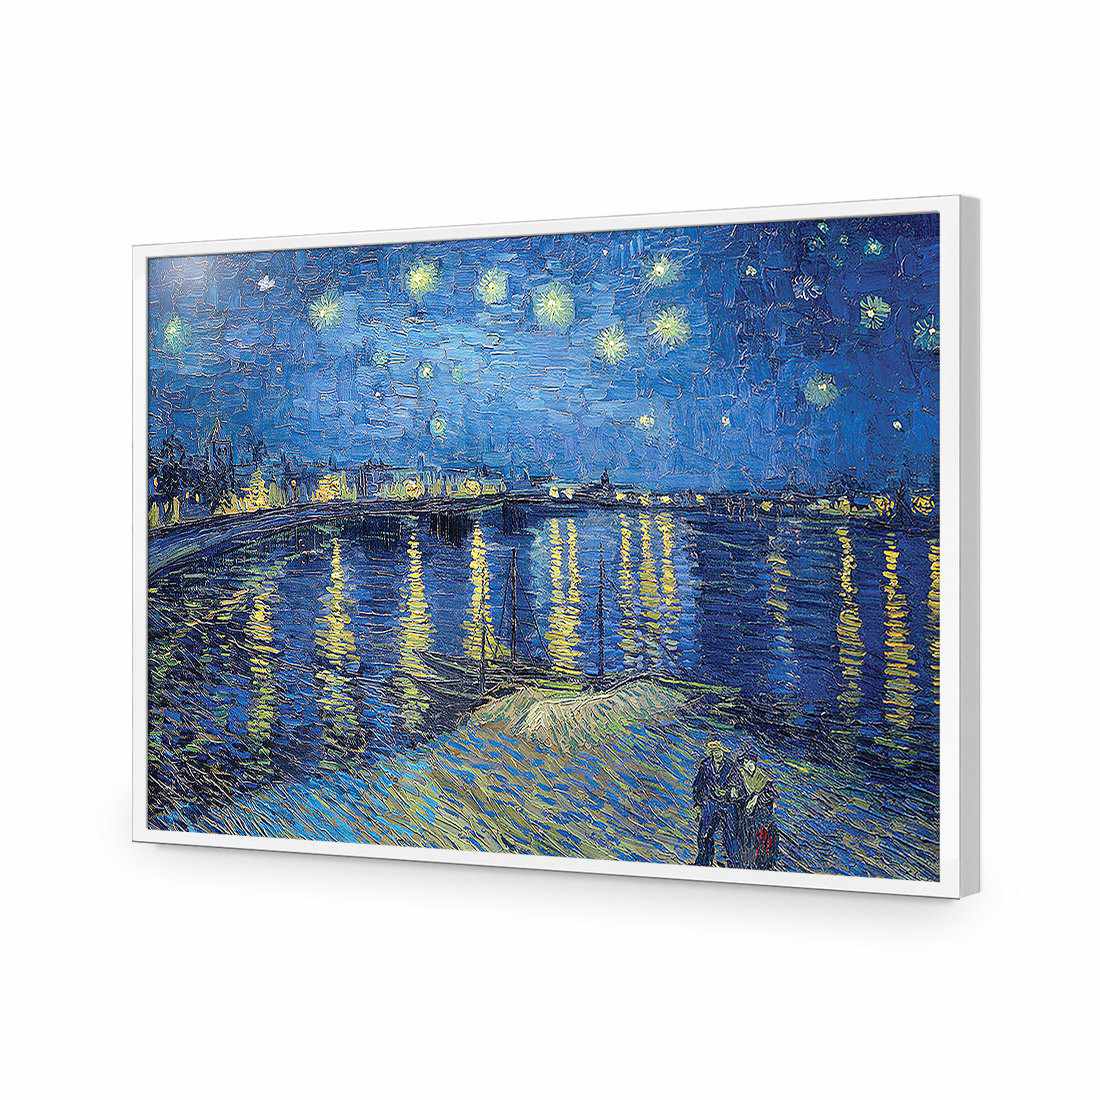 Starry Night Over the Rhone - Van Gogh-Acrylic-Wall Art Design-Without Border-Acrylic - White Frame-45x30cm-Wall Art Designs